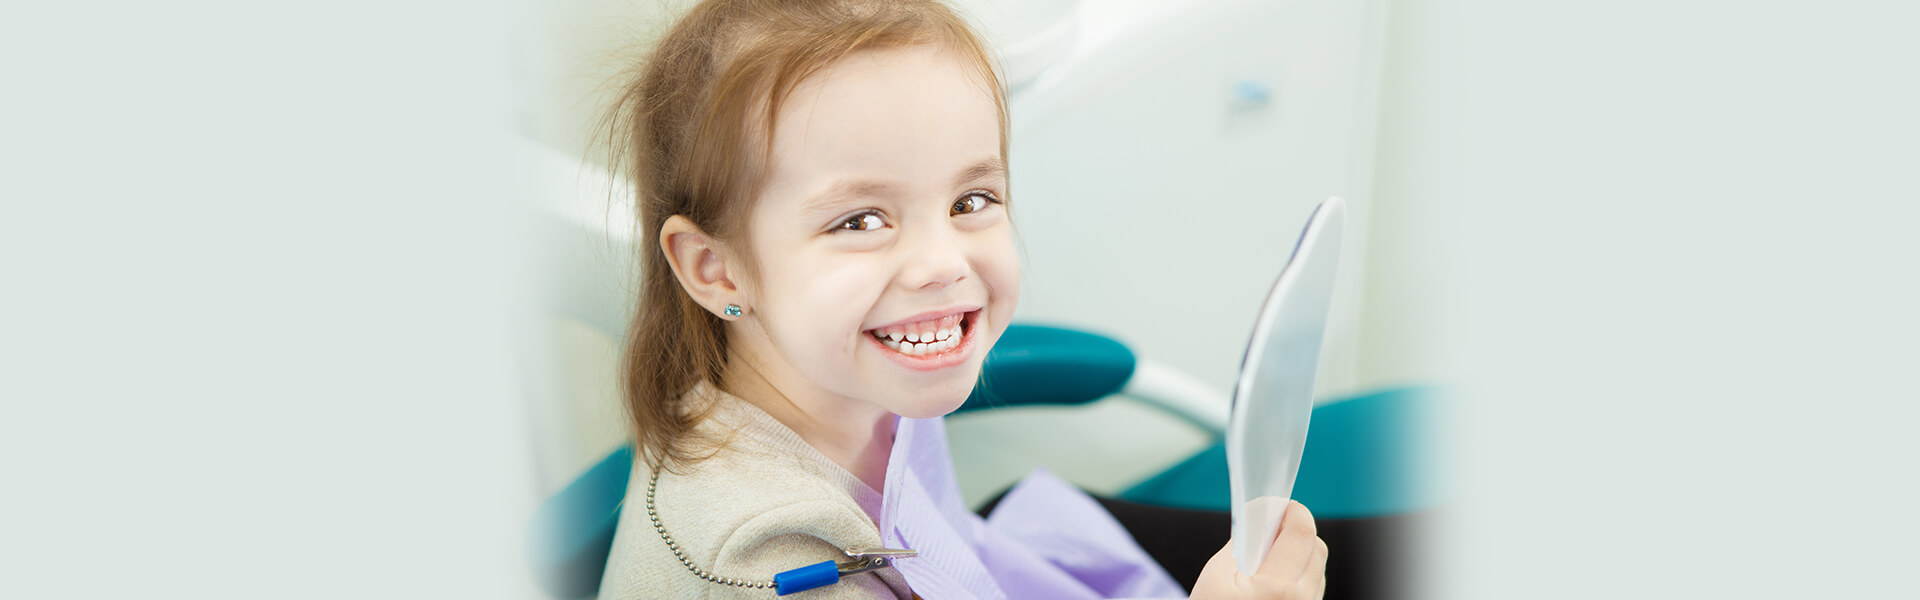 Why Are the Metal-Free Fillings Ideal for Children?